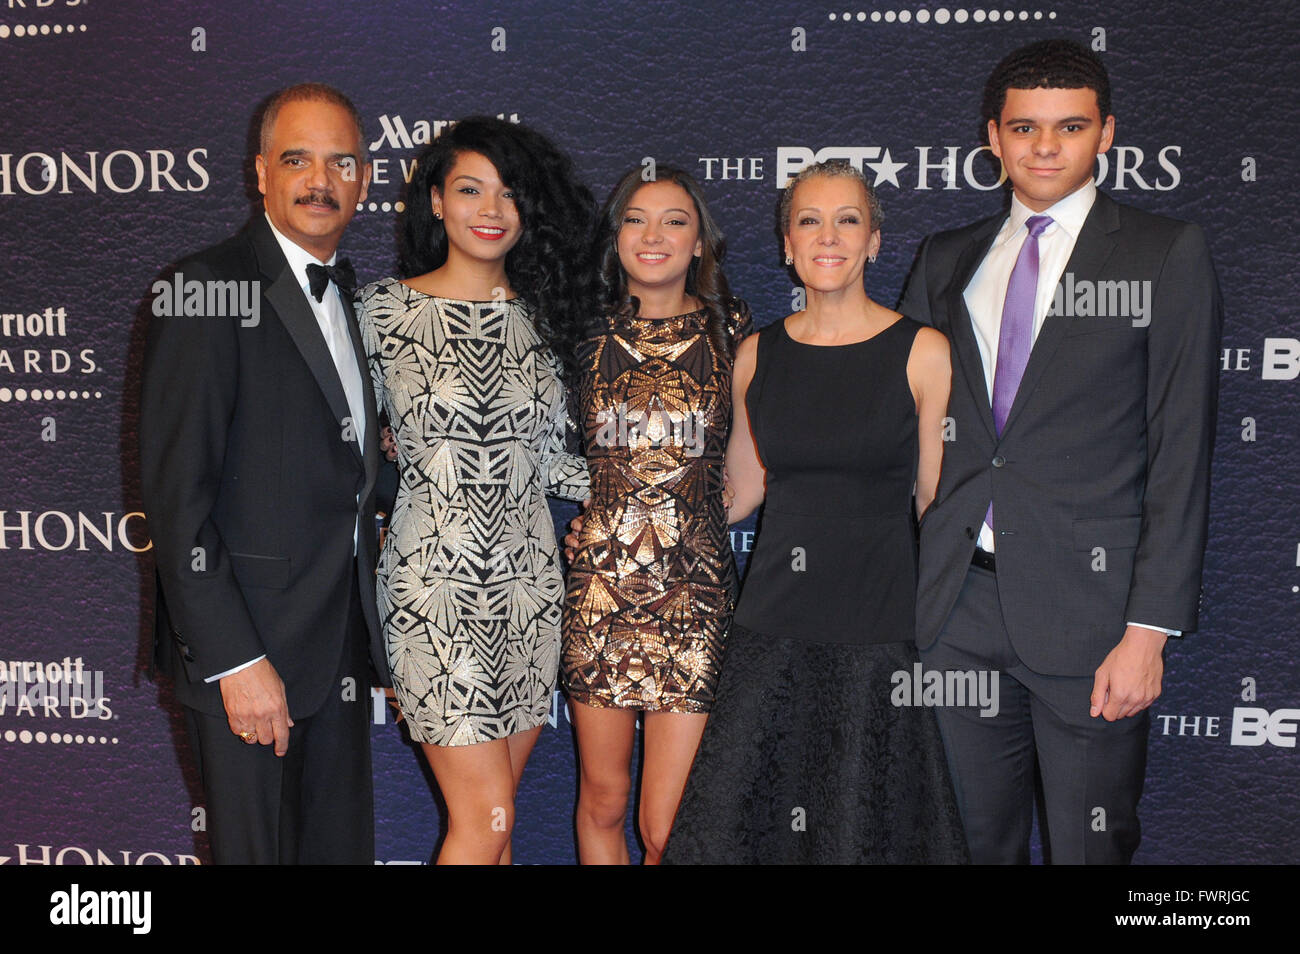 2016 BET Honors held at the Warner Theater - Arrivals  Featuring: Eric Holder, Maya Holder, Brooke Holder, Sharon Malone Where: Washington, District Of Columbia, United States When: 05 Mar 2016 Stock Photo